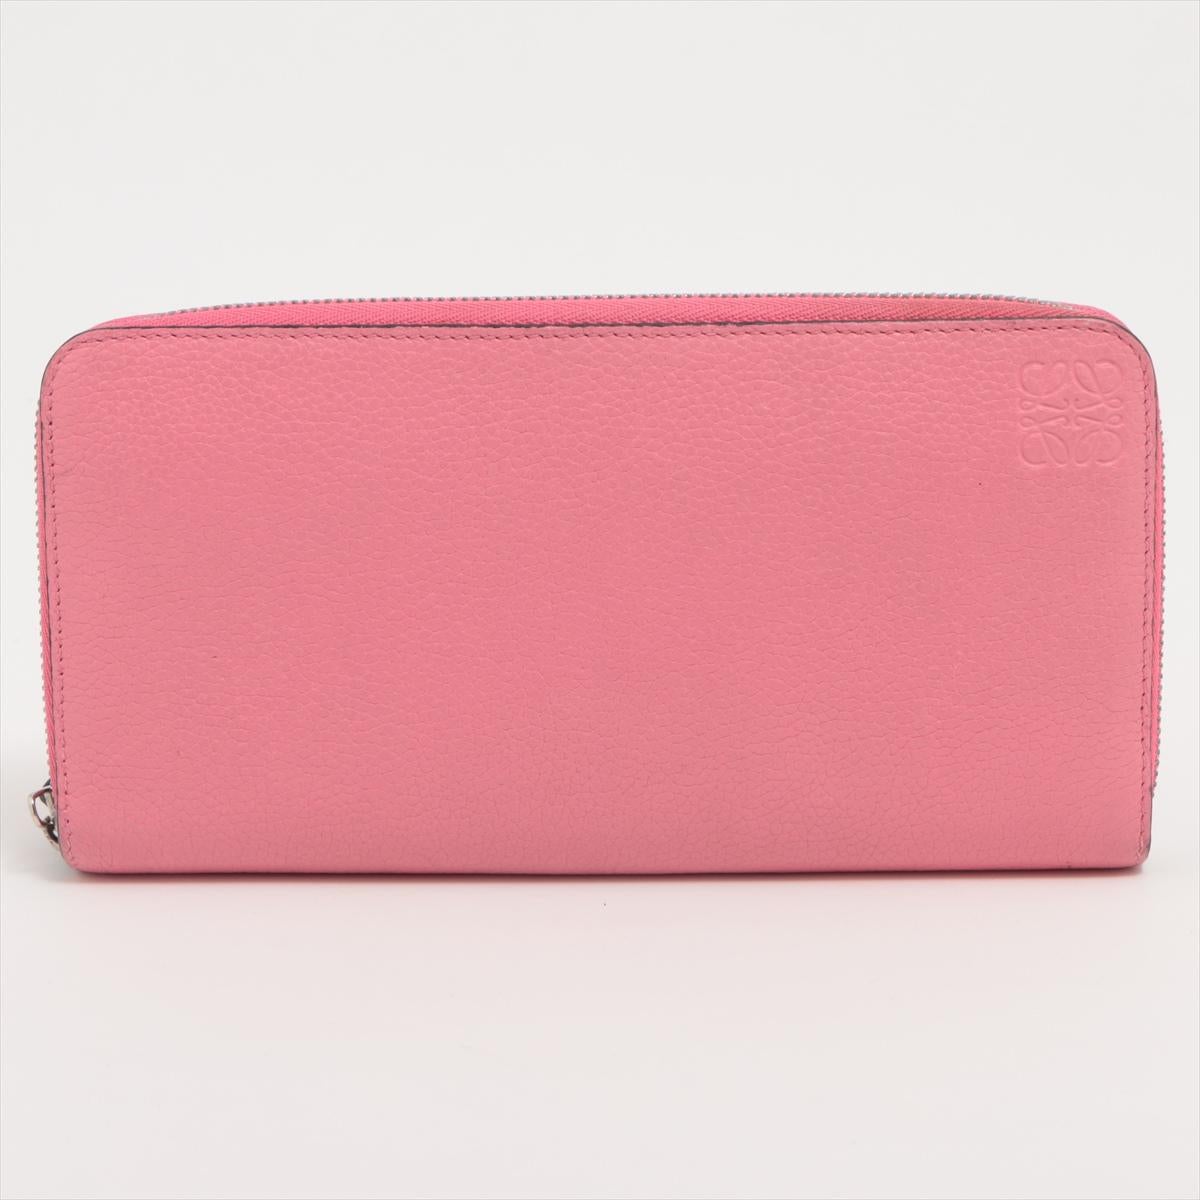 The Loewe Anagram Leather Zippy Wallet in Pink a chic and versatile accessory that seamlessly combines luxury with modern design. Meticulously crafted from smooth leather, the wallet features the iconic Loewe Anagram logo in an understated yet